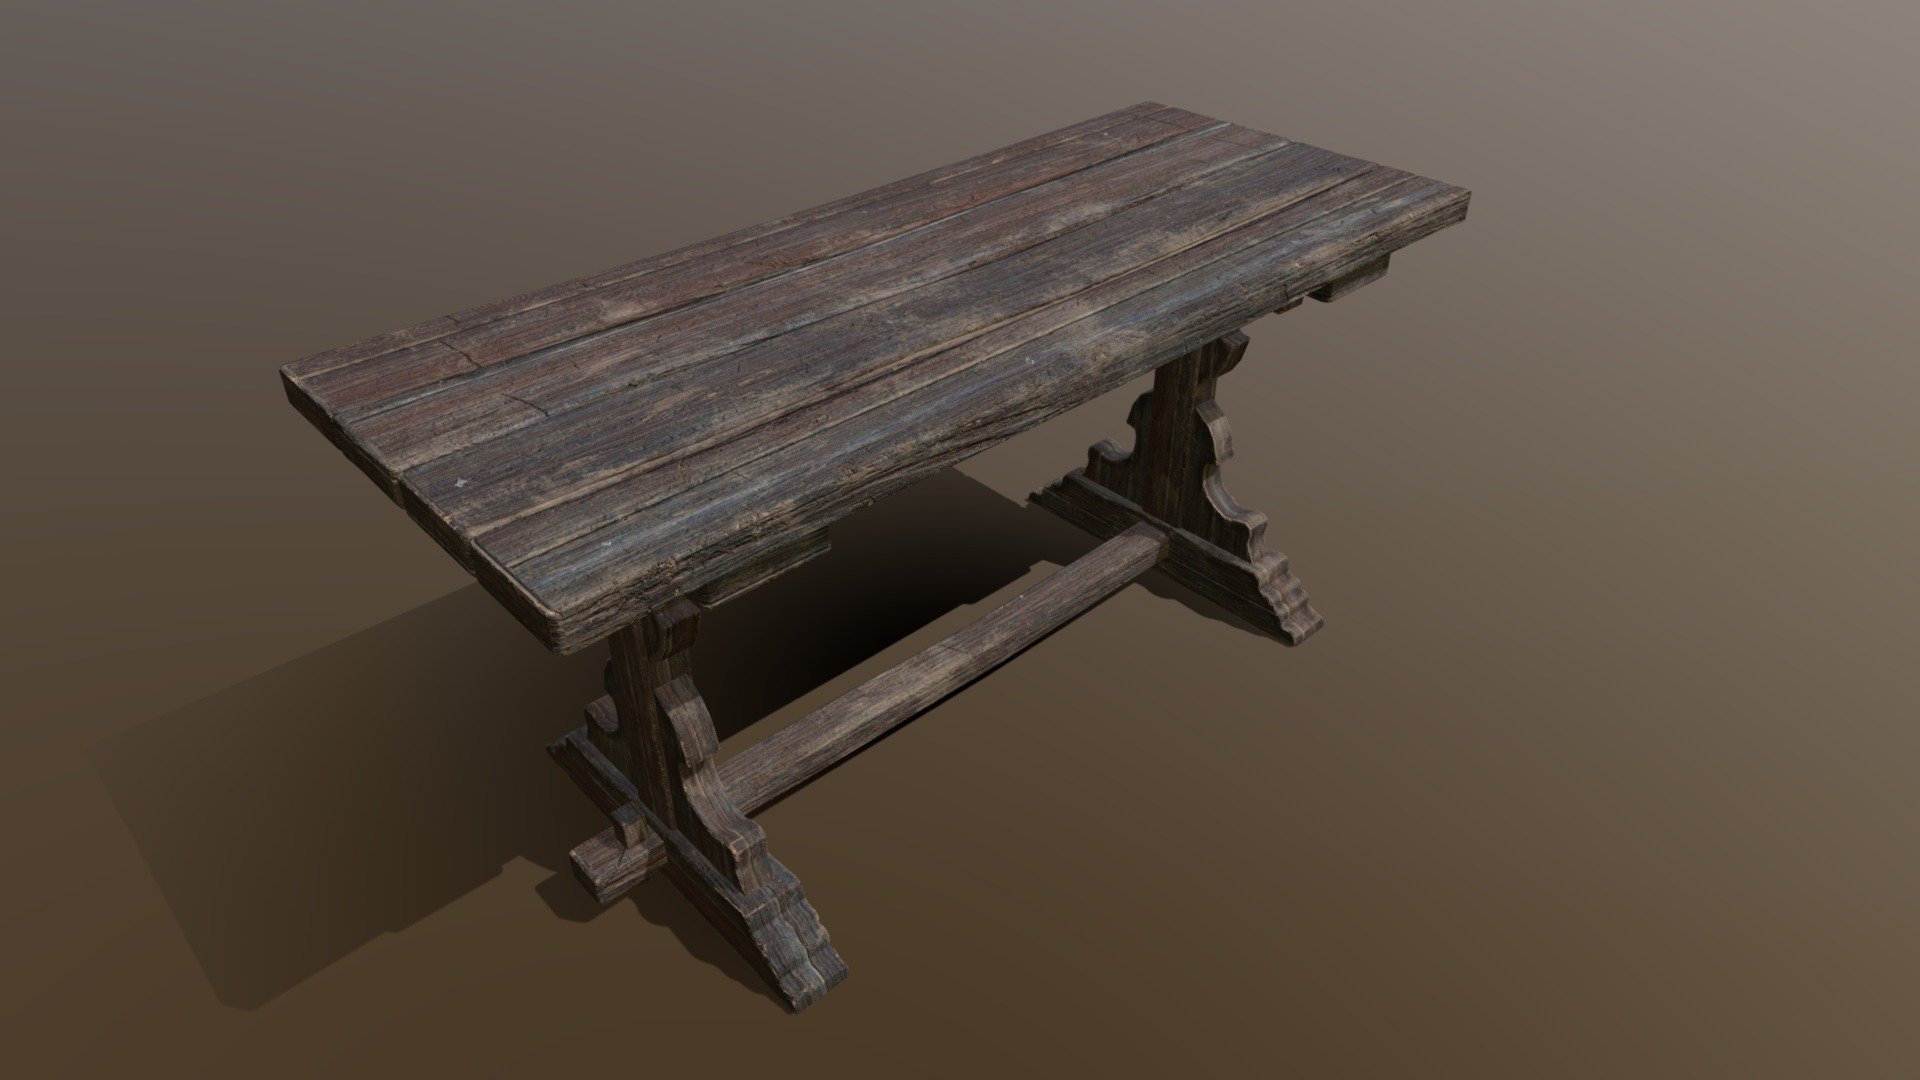 Elegant Medieval Table 3D Model. This model contains the Elegant Medieval Table itself 

All modeled in Maya, textured with Substance Painter.

The model was built to scale and is UV unwrapped properly. Contains a 4K and 2K texture set.  

⦁   6344 tris. 

⦁   Contains: .FBX .OBJ and .DAE

⦁   Model has clean topology. No Ngons.

⦁   Built to scale

⦁   Unwrapped UV Map

⦁   4K Texture set

⦁   High quality details

⦁   Based on real life references

⦁   Renders done in Marmoset Toolbag

Polycount: 

Verts 3452

Edges 6660 

Faces 3236

Tris 6344

If you have any questions please feel free to ask me 3d model